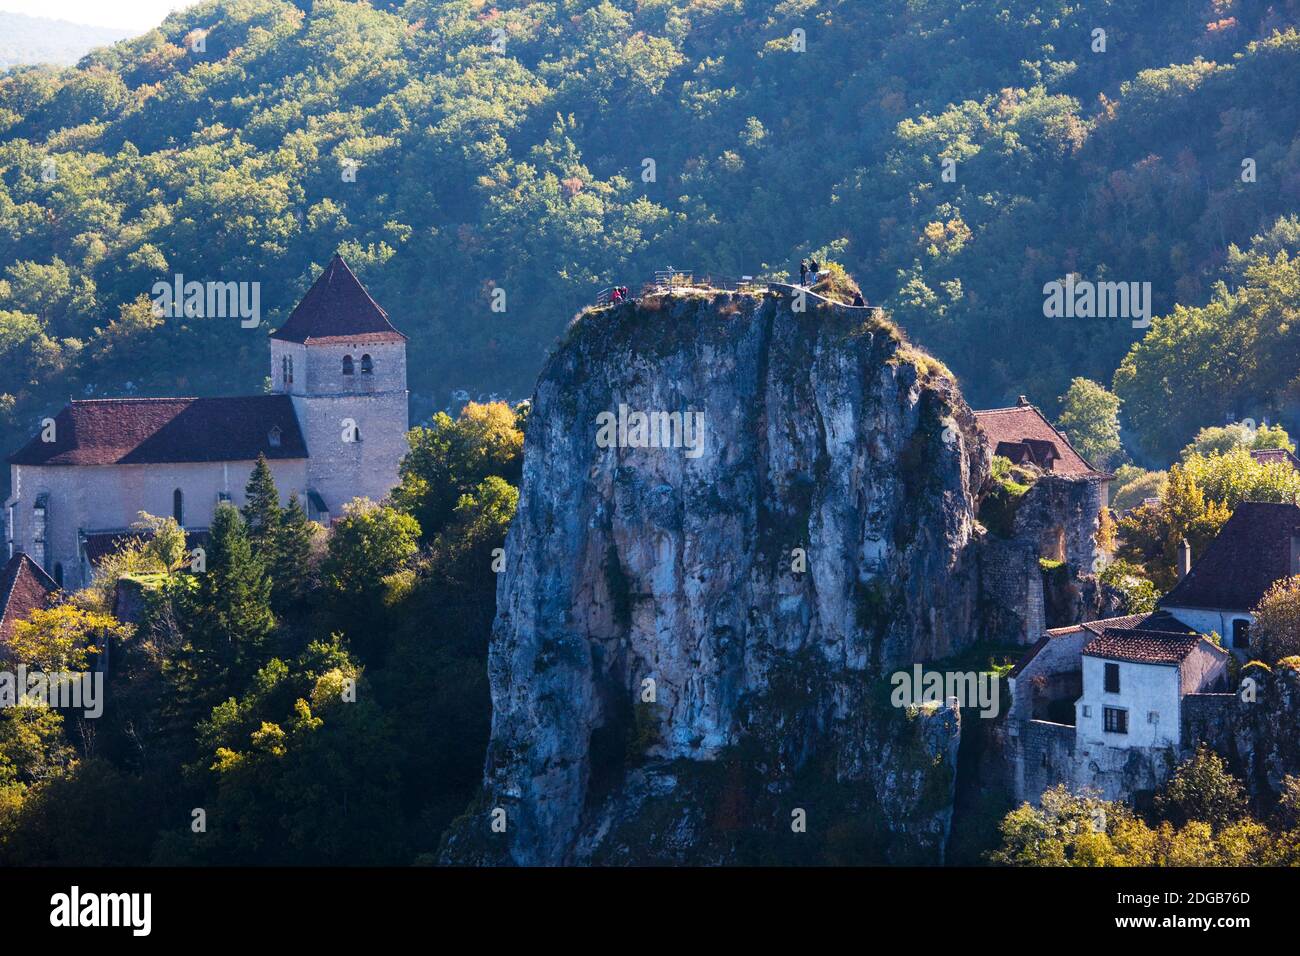 Ruins of the town chateau, St-Cirq-Lapopie, Lot, Midi-Pyrenees, France Stock Photo